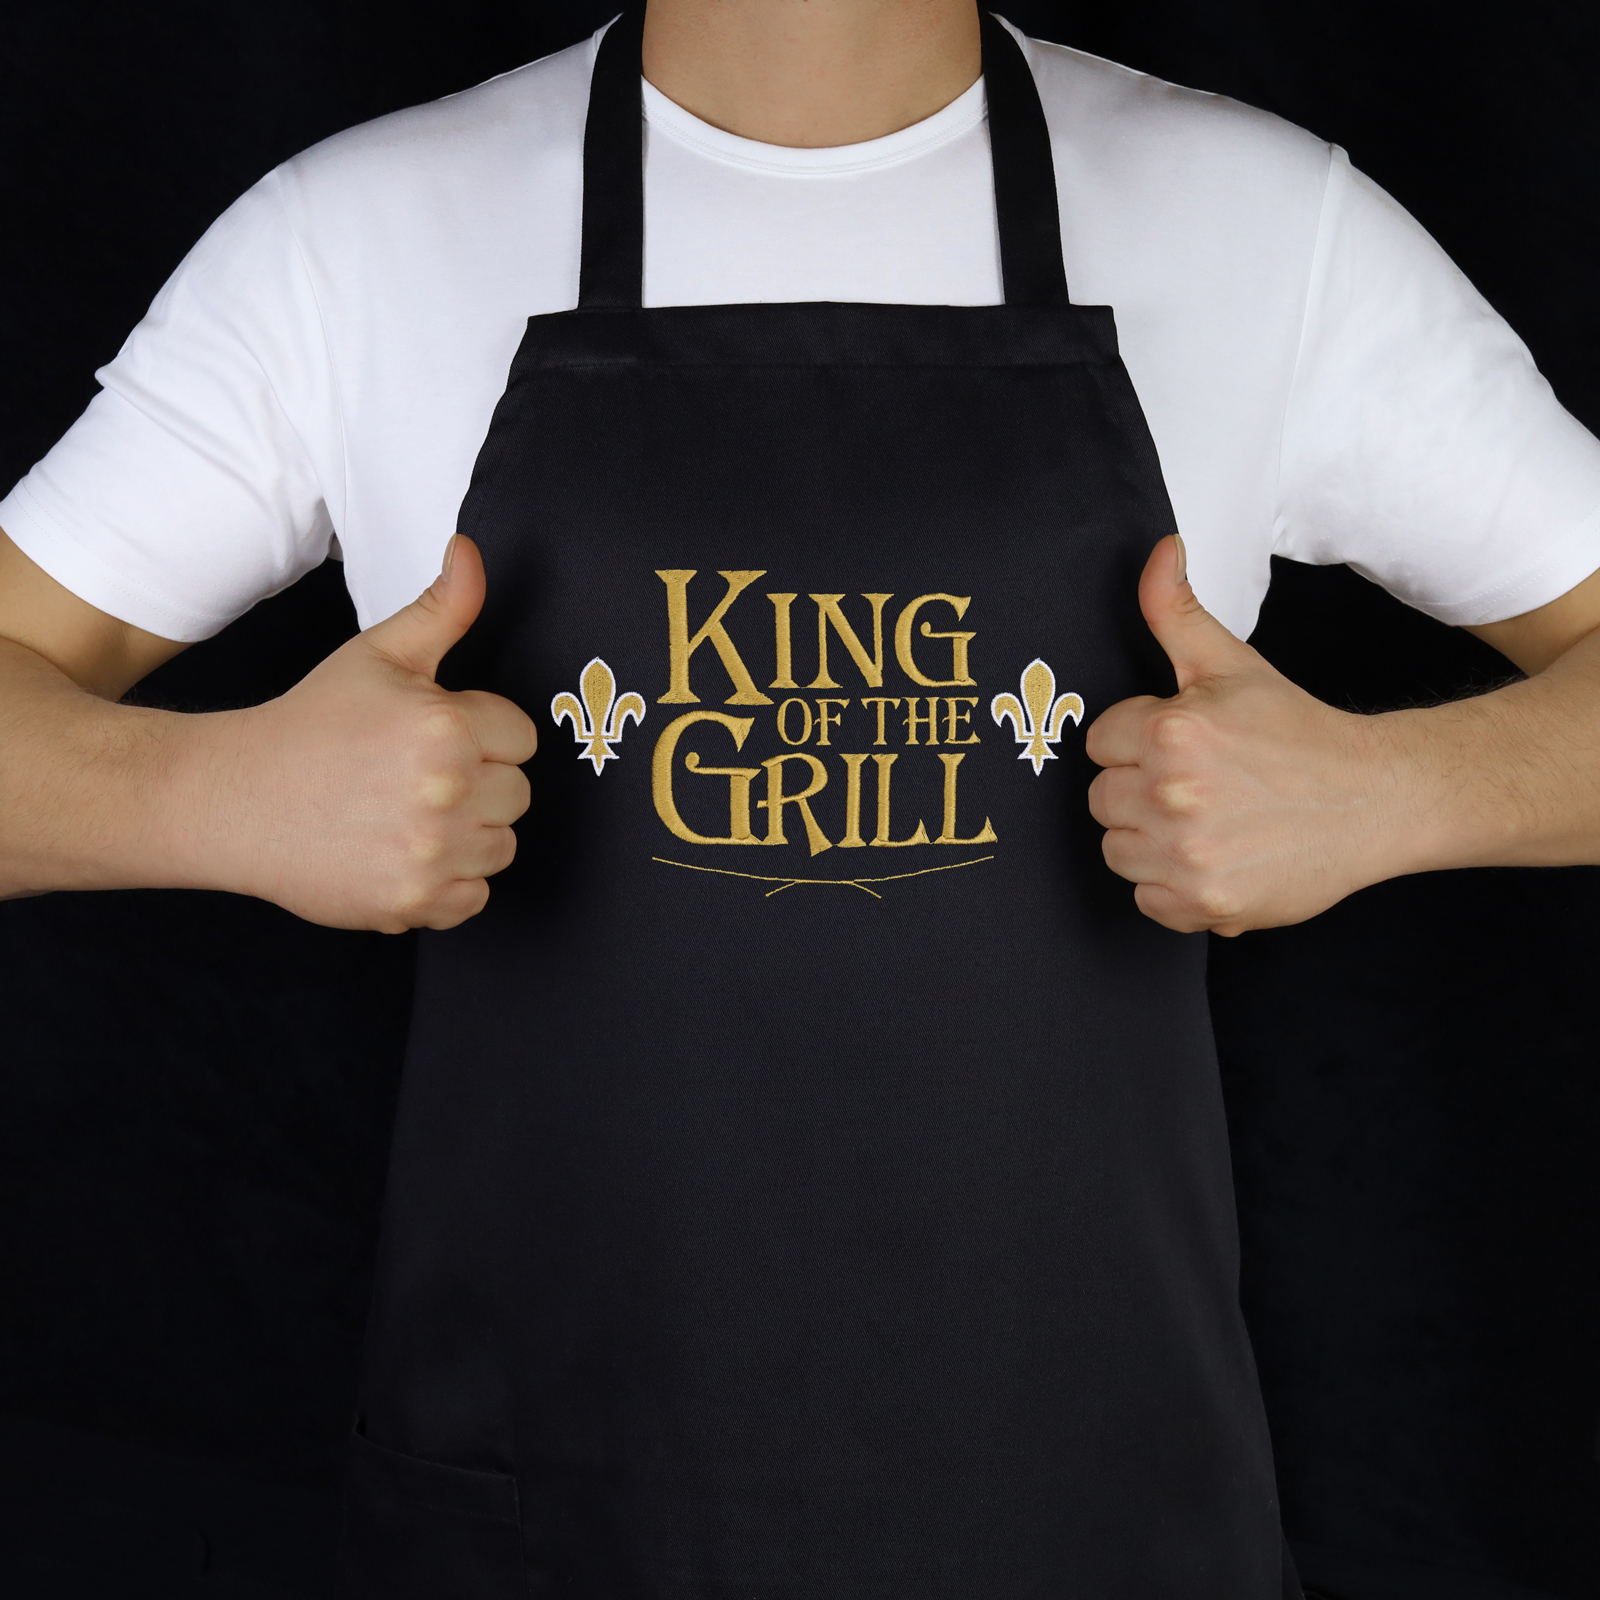 King of the grill - Lilie- Grillschürze